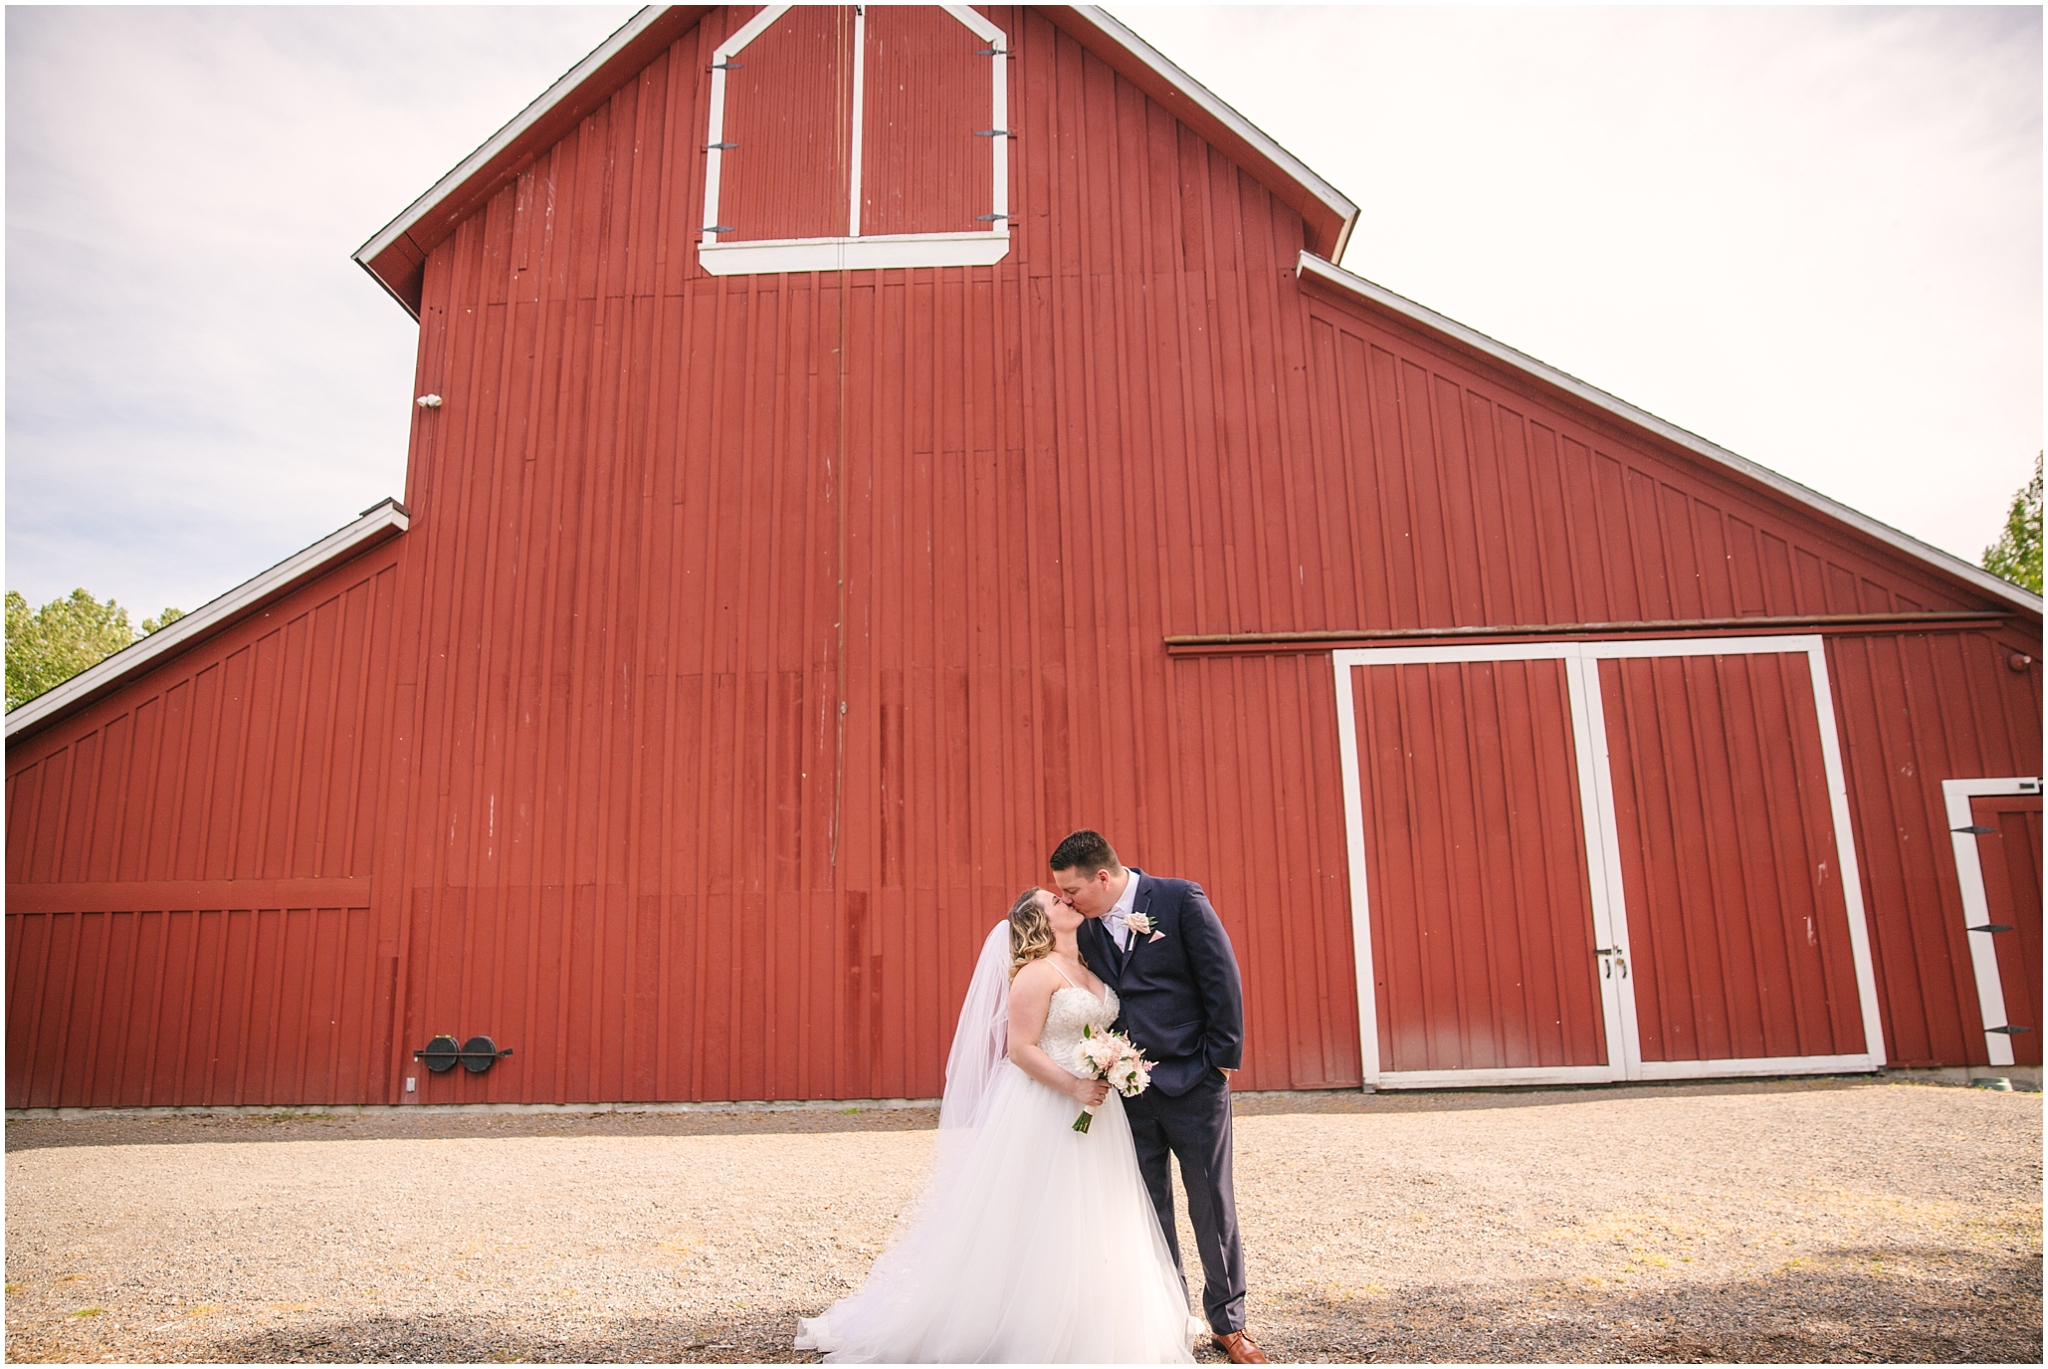 Bride and groom kissing in front of red Pickering Barn in Issaquah Washington